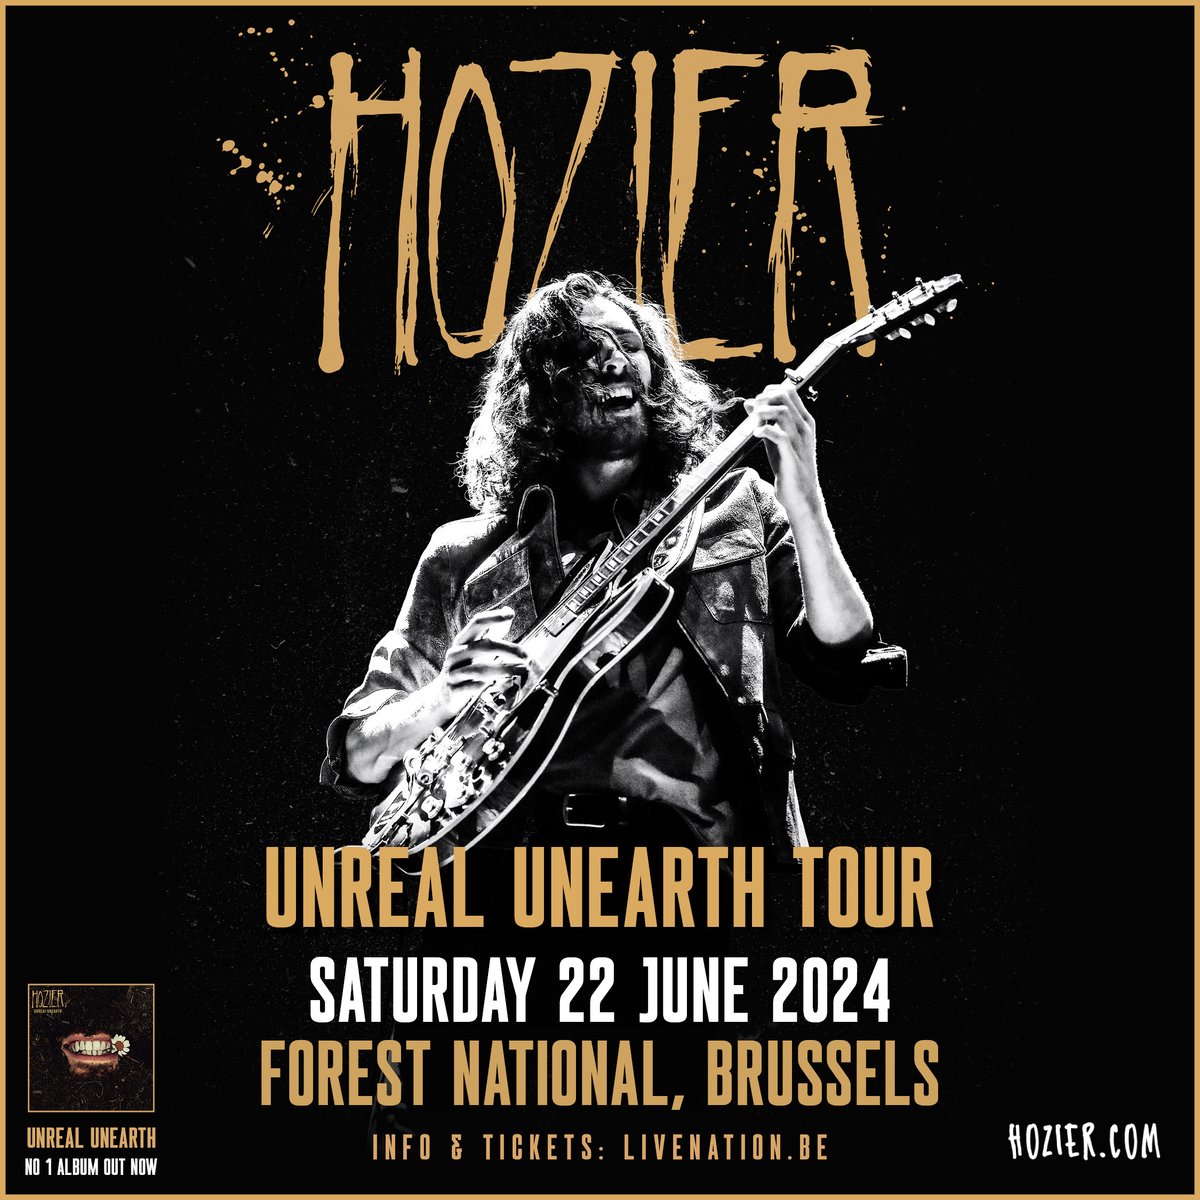 Brussels! 🇧🇪 Tickets for my show at @forestnational on Saturday 22 June are on sale now 🖤 🎟️ hozier.com/live 📸 @ruthlessimagery